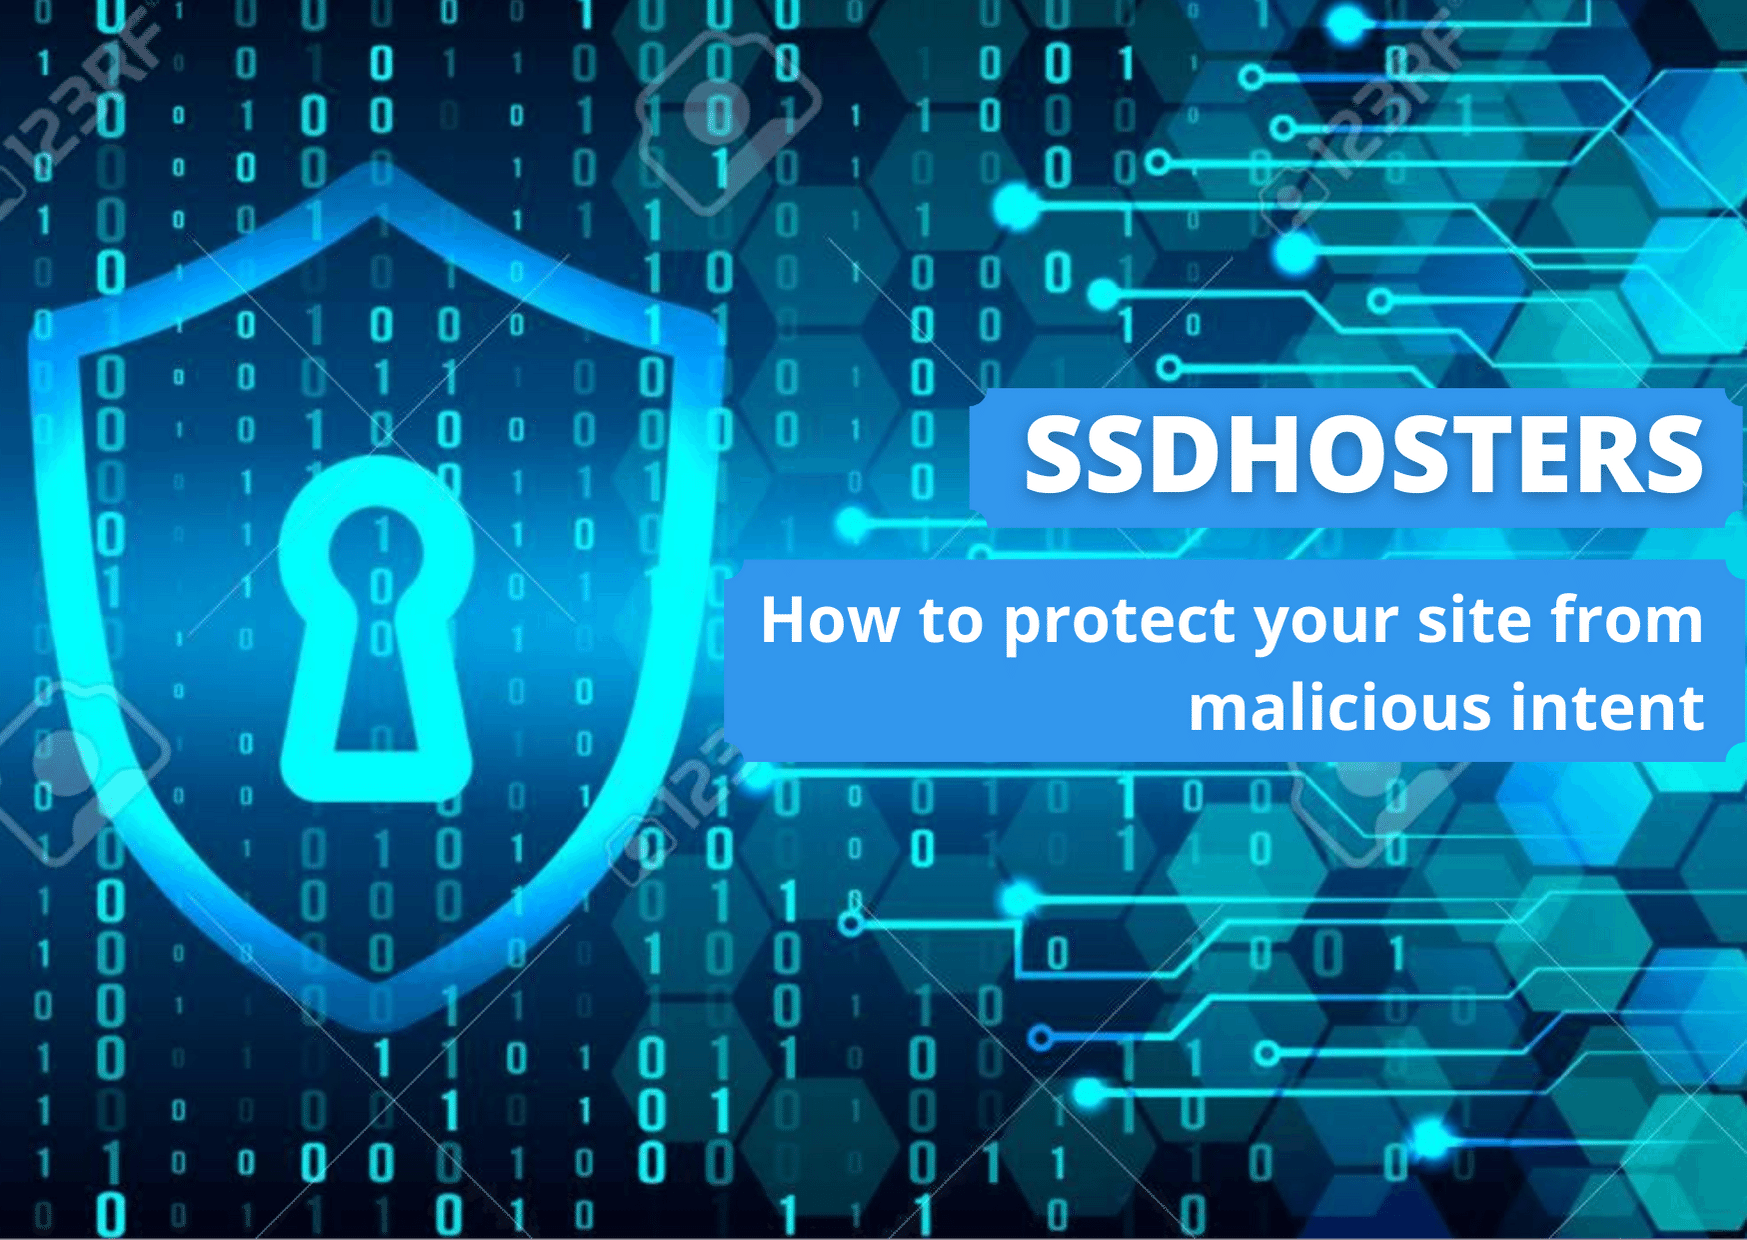 How to protect your site from malicious intent | SSDHOSTERS